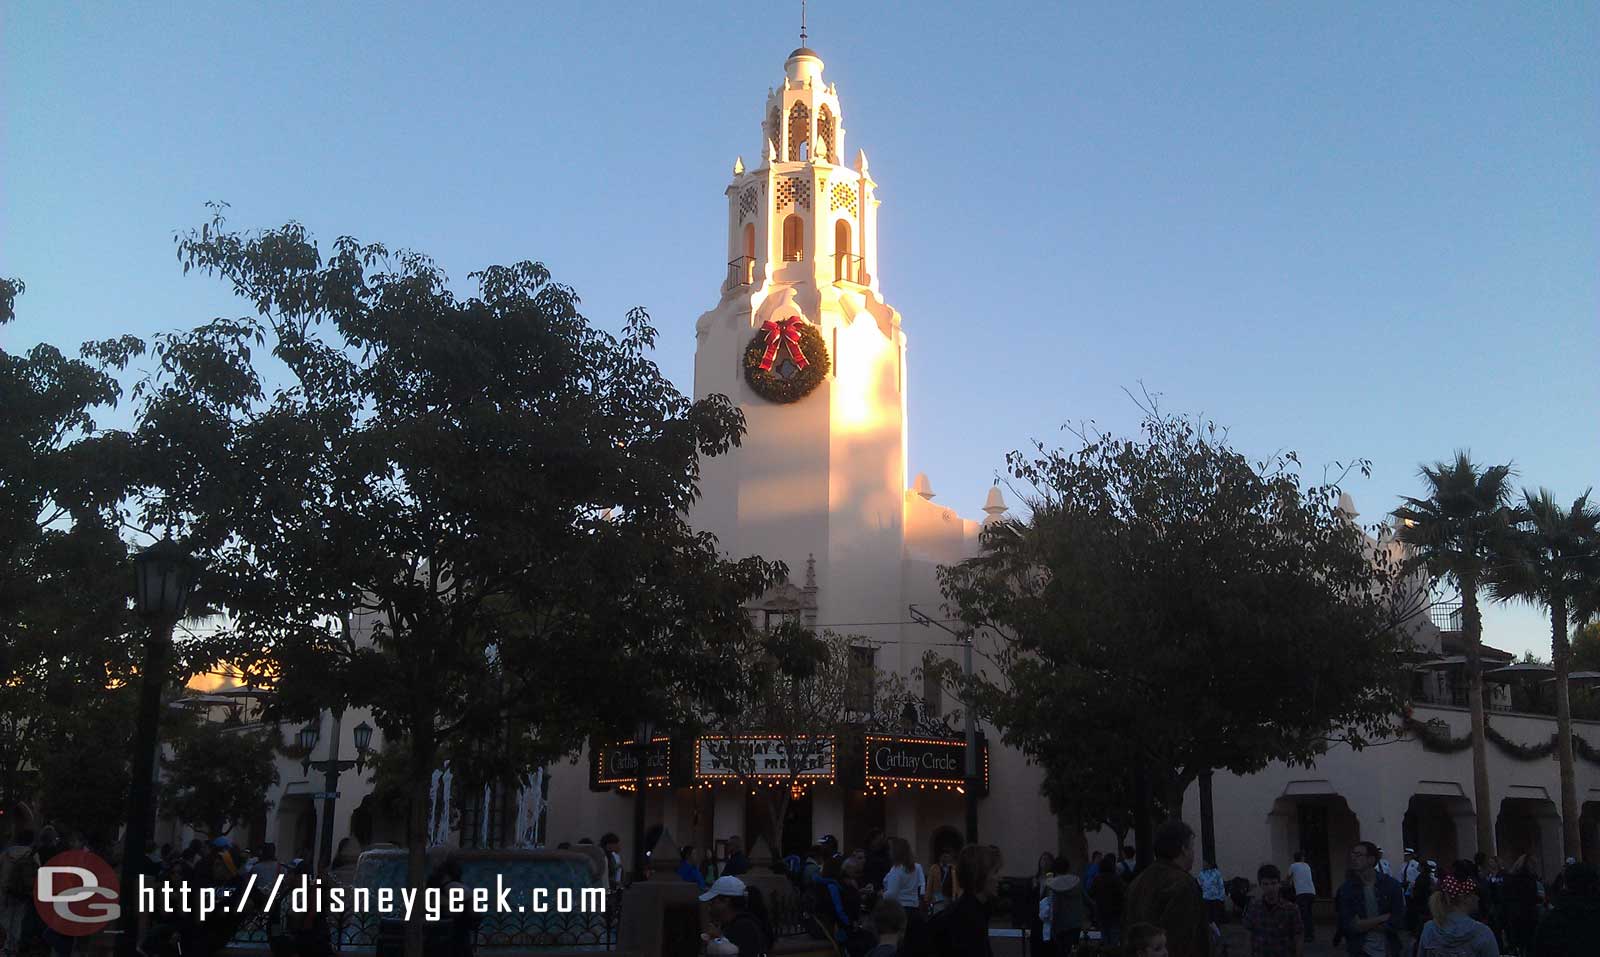 The Carthay Circle Restaurant as the sun is setting